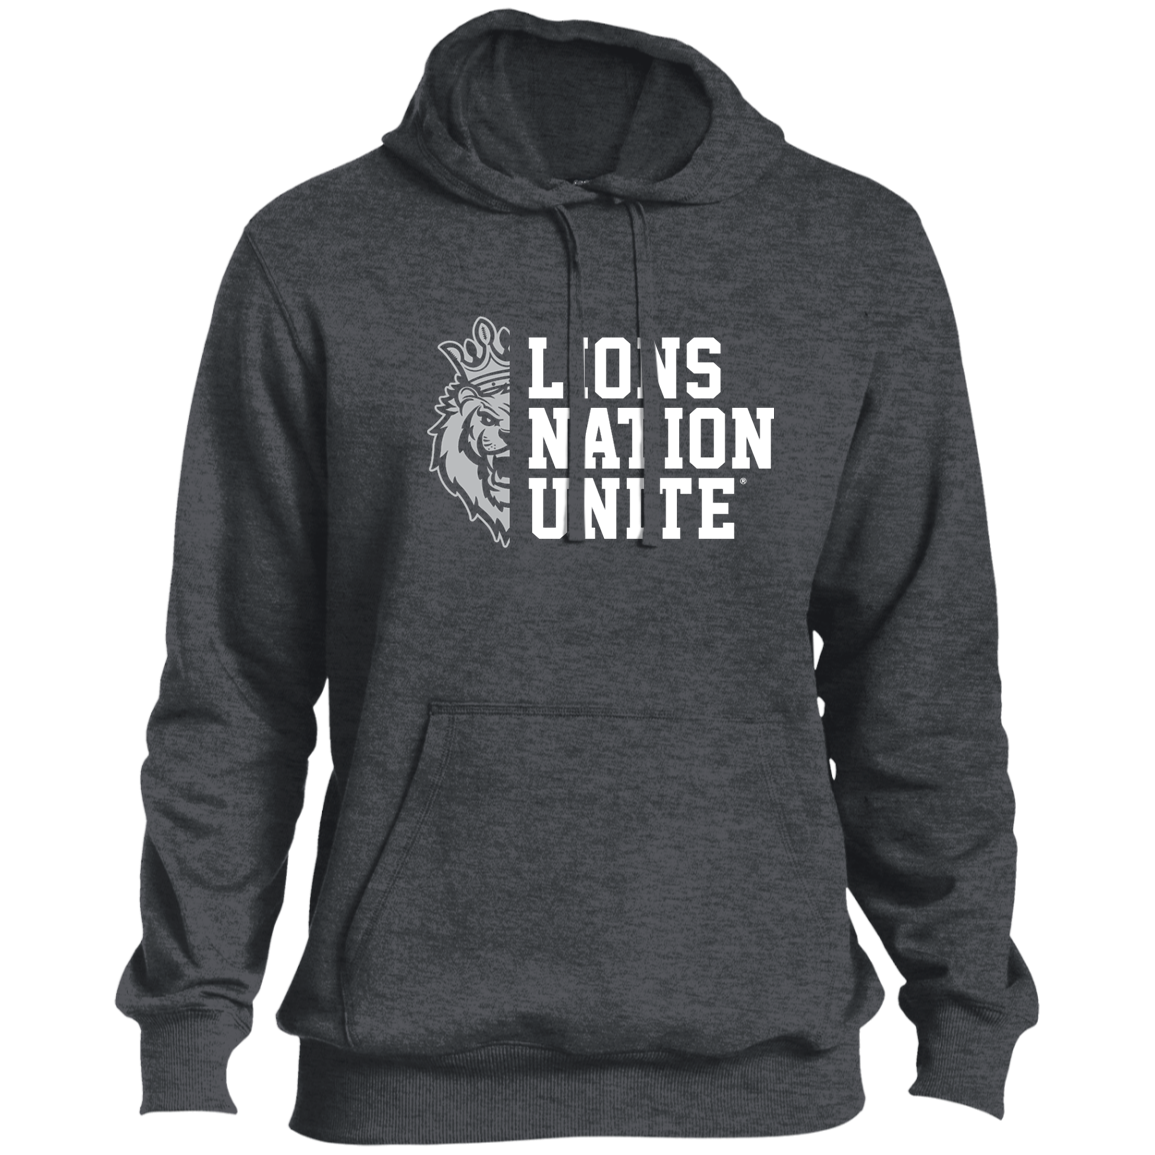 Lions Nation Unite® Tall Pullover Hoodie